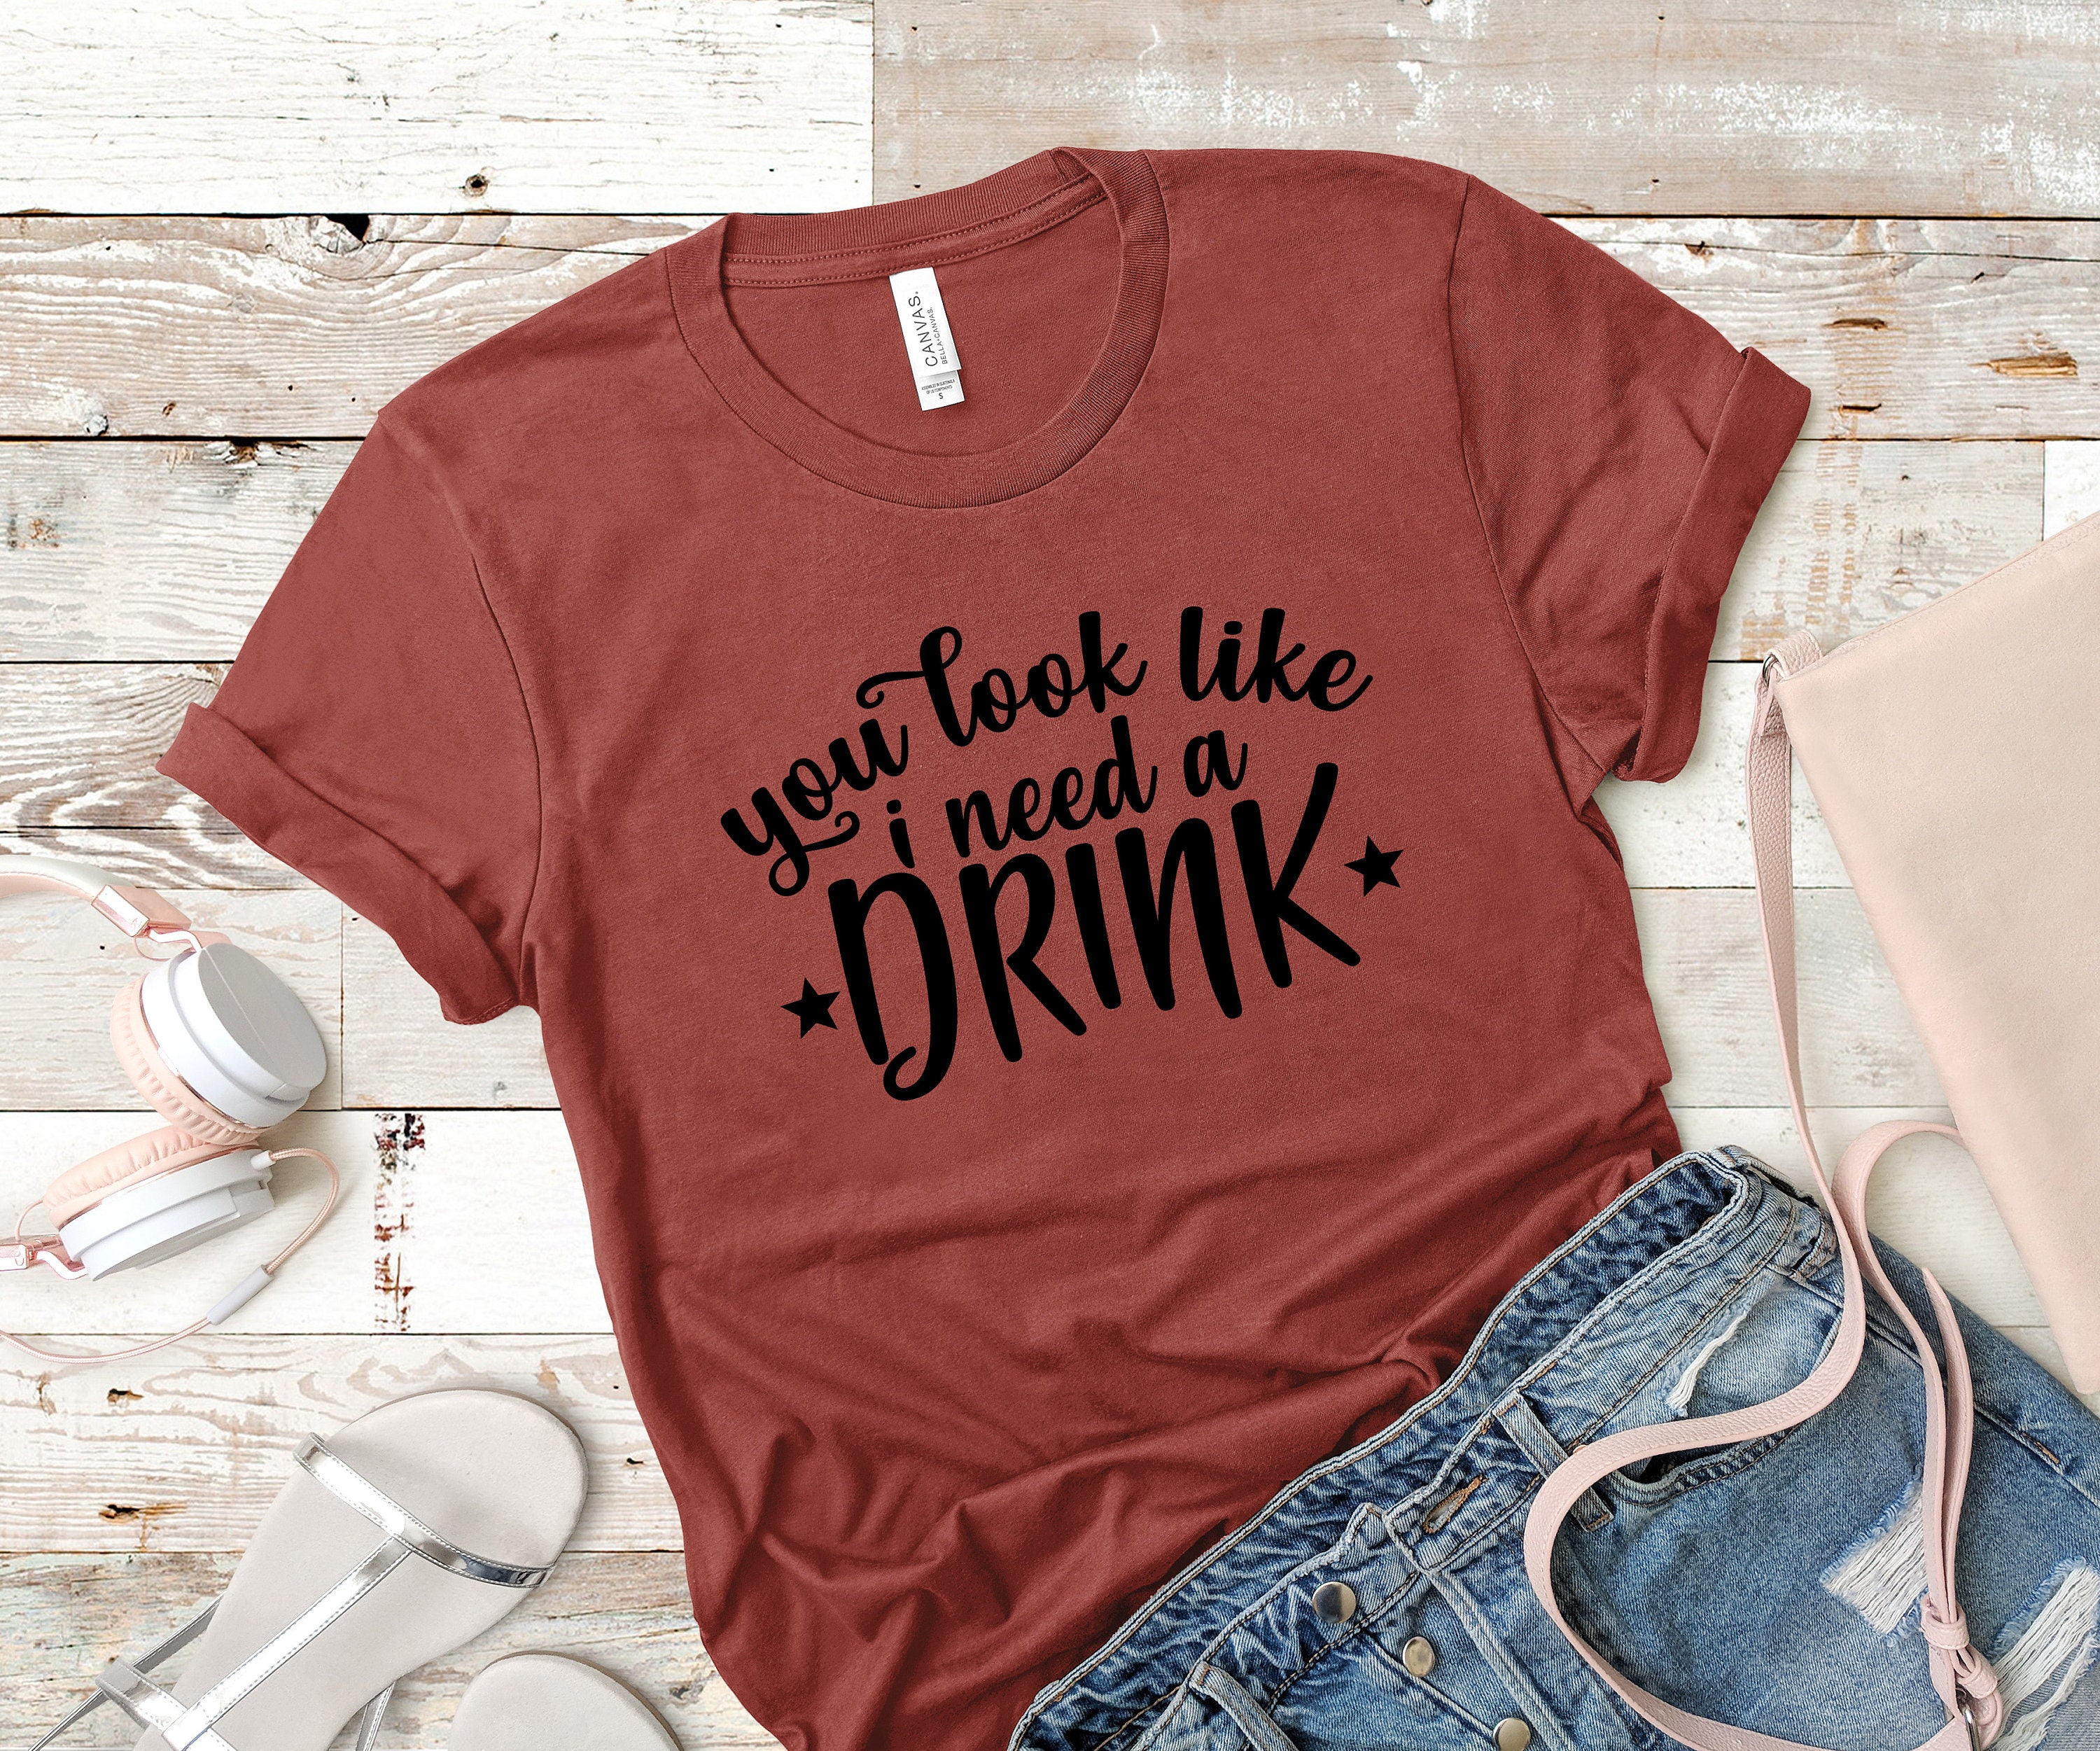 Look like I need a drink shirt Country music shirt Country | Etsy